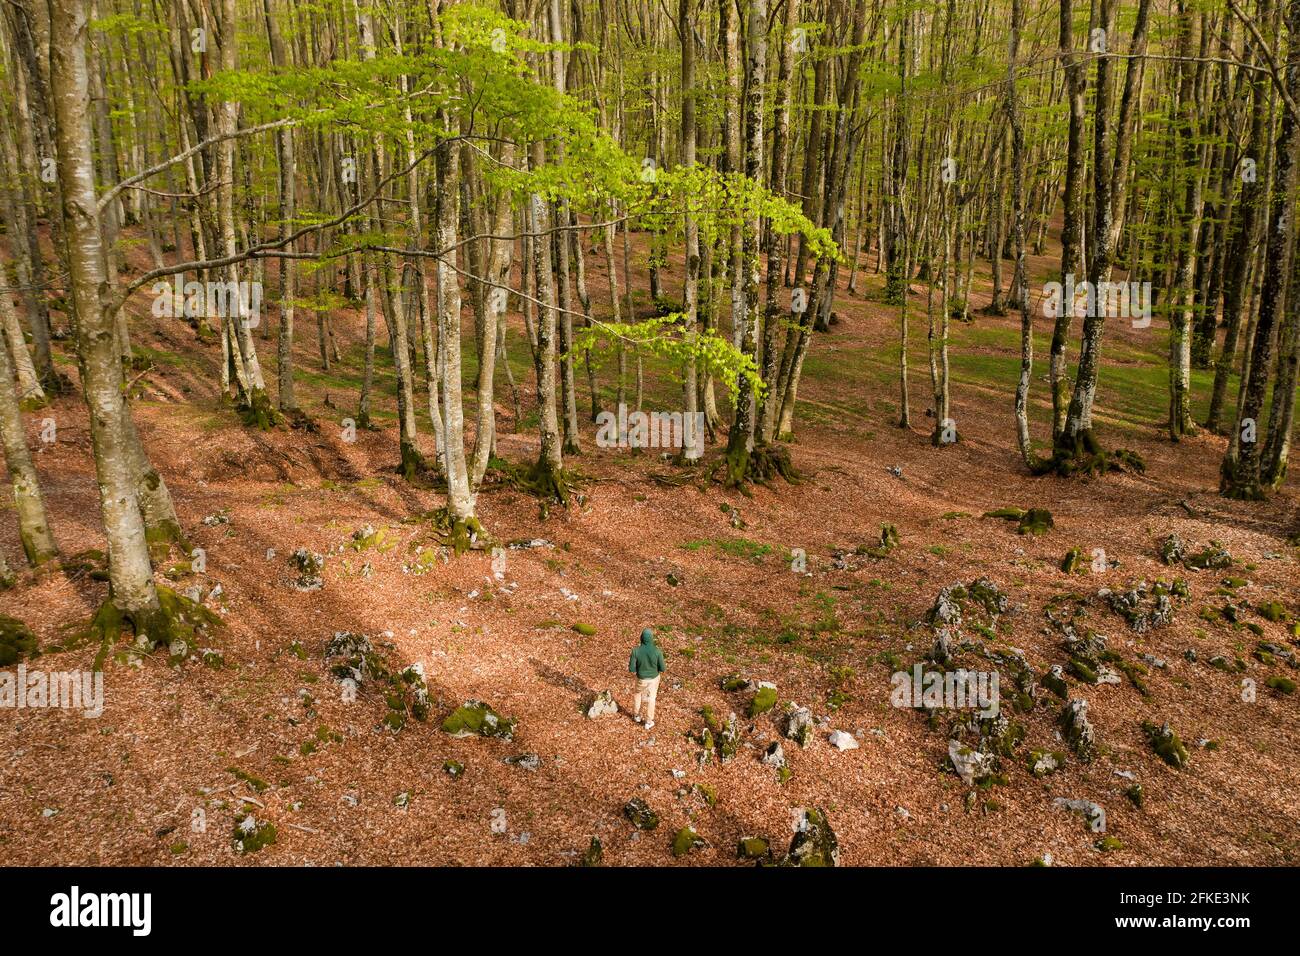 View from above, stunning aerial view of a person walking in a forest surrounded by beautiful Fagus Sylvatica trees. Travel concept, outdoor pursuit. Stock Photo